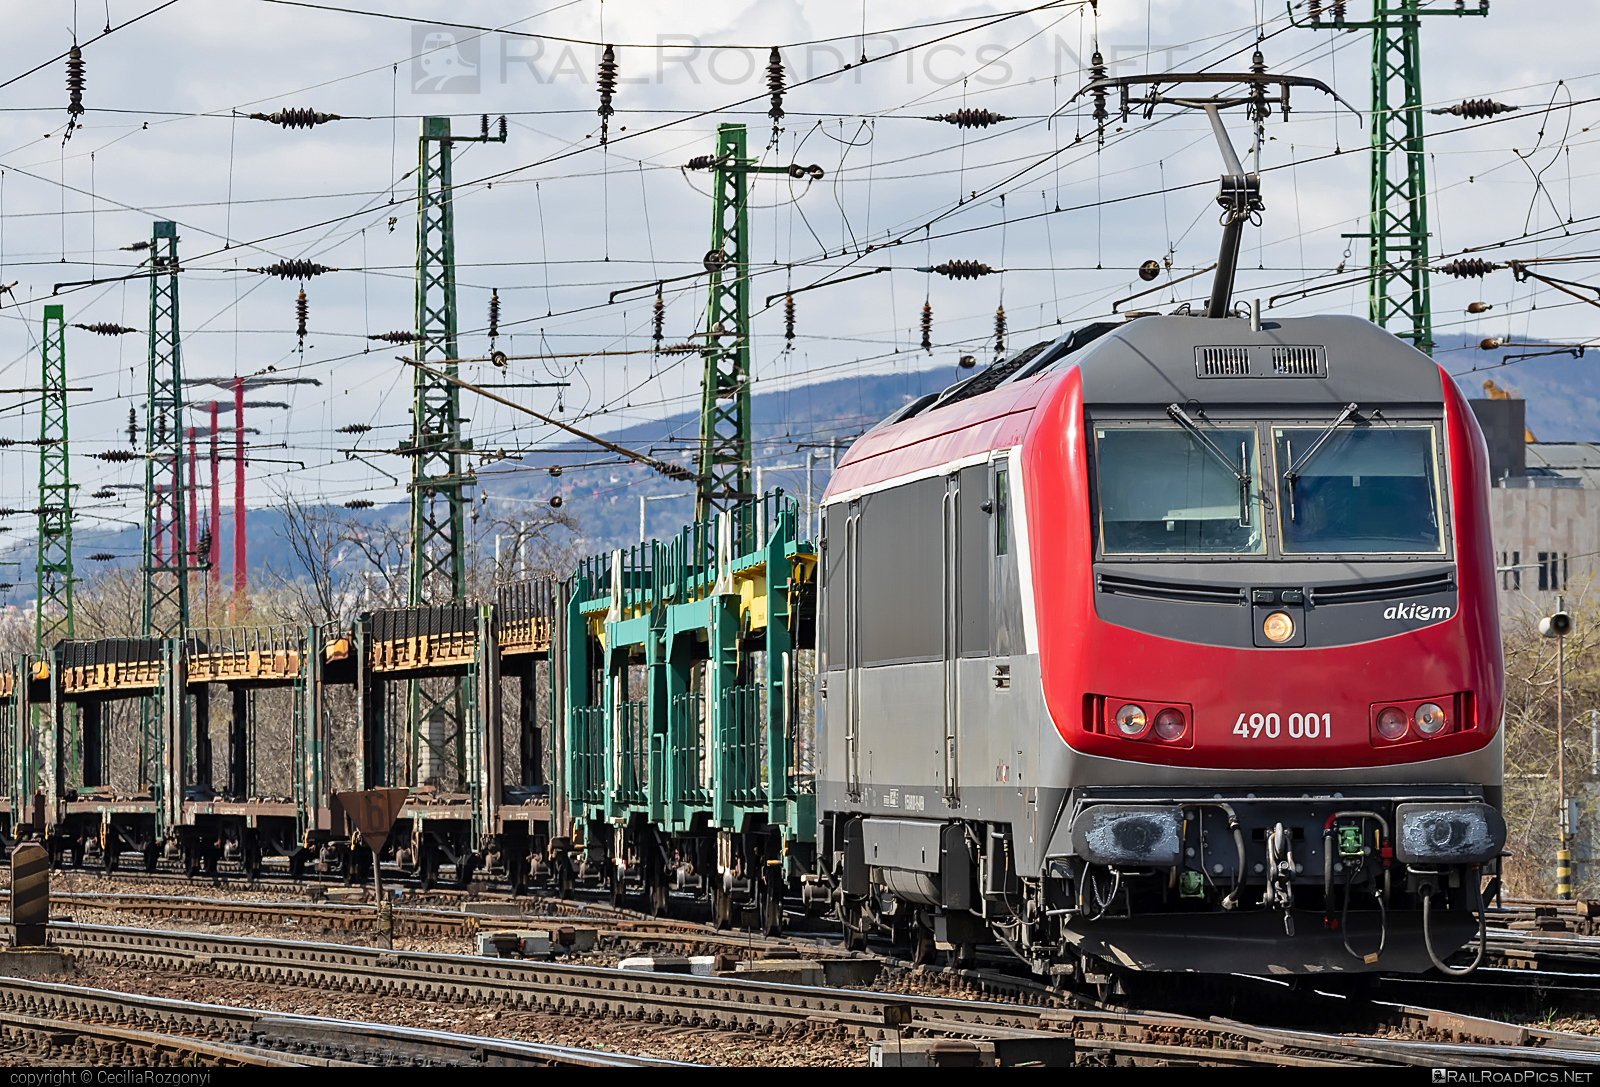 GEC Alsthom SNCF Class BB 36000 `Astride` - 490 001 operated by Akiem SAS #akiem #akiemsas #alstom #alstomAstride #alstomBB36000 #bb36000 #bb36000astride #carcarrierwagon #gecAlsthomAstride #gecAlsthomBB36000 #gecalsthom